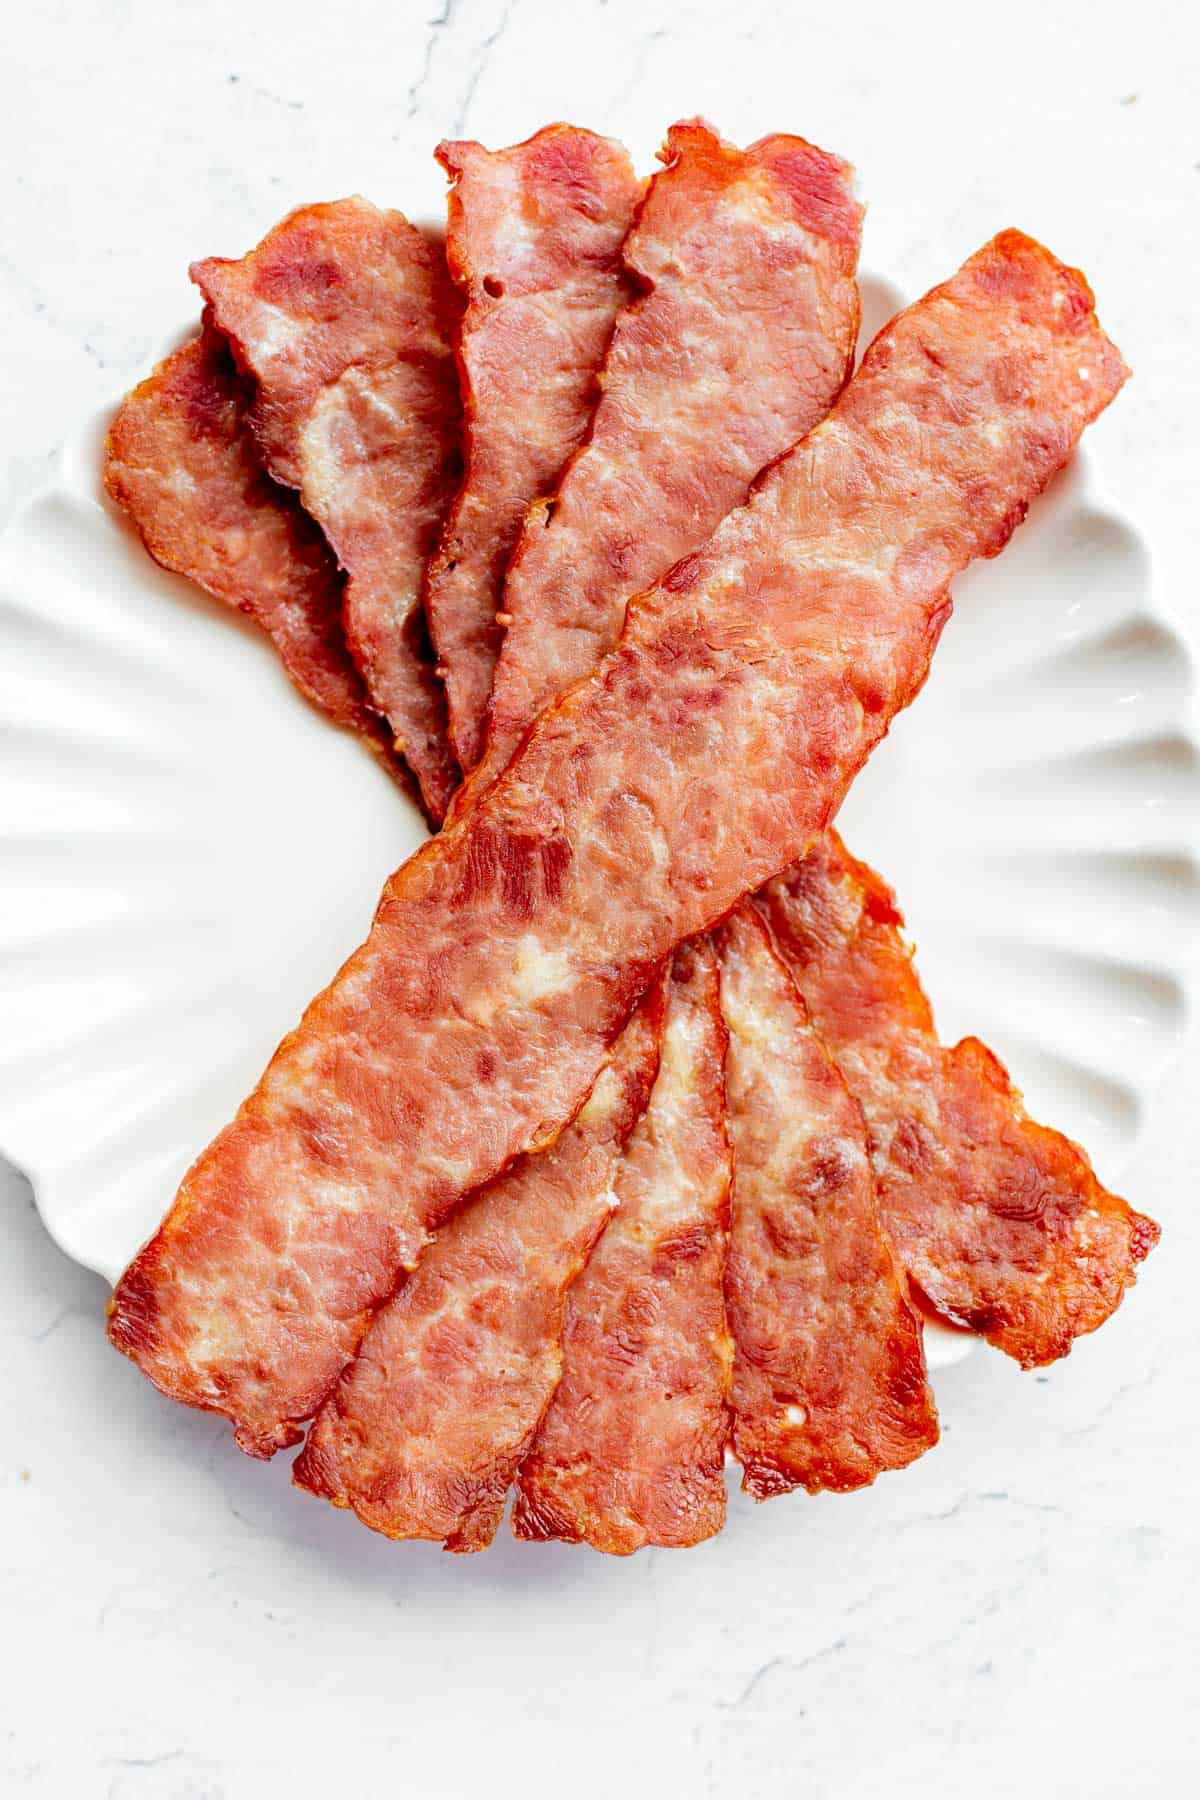 turkey bacon in the oven laid out on a white plate.